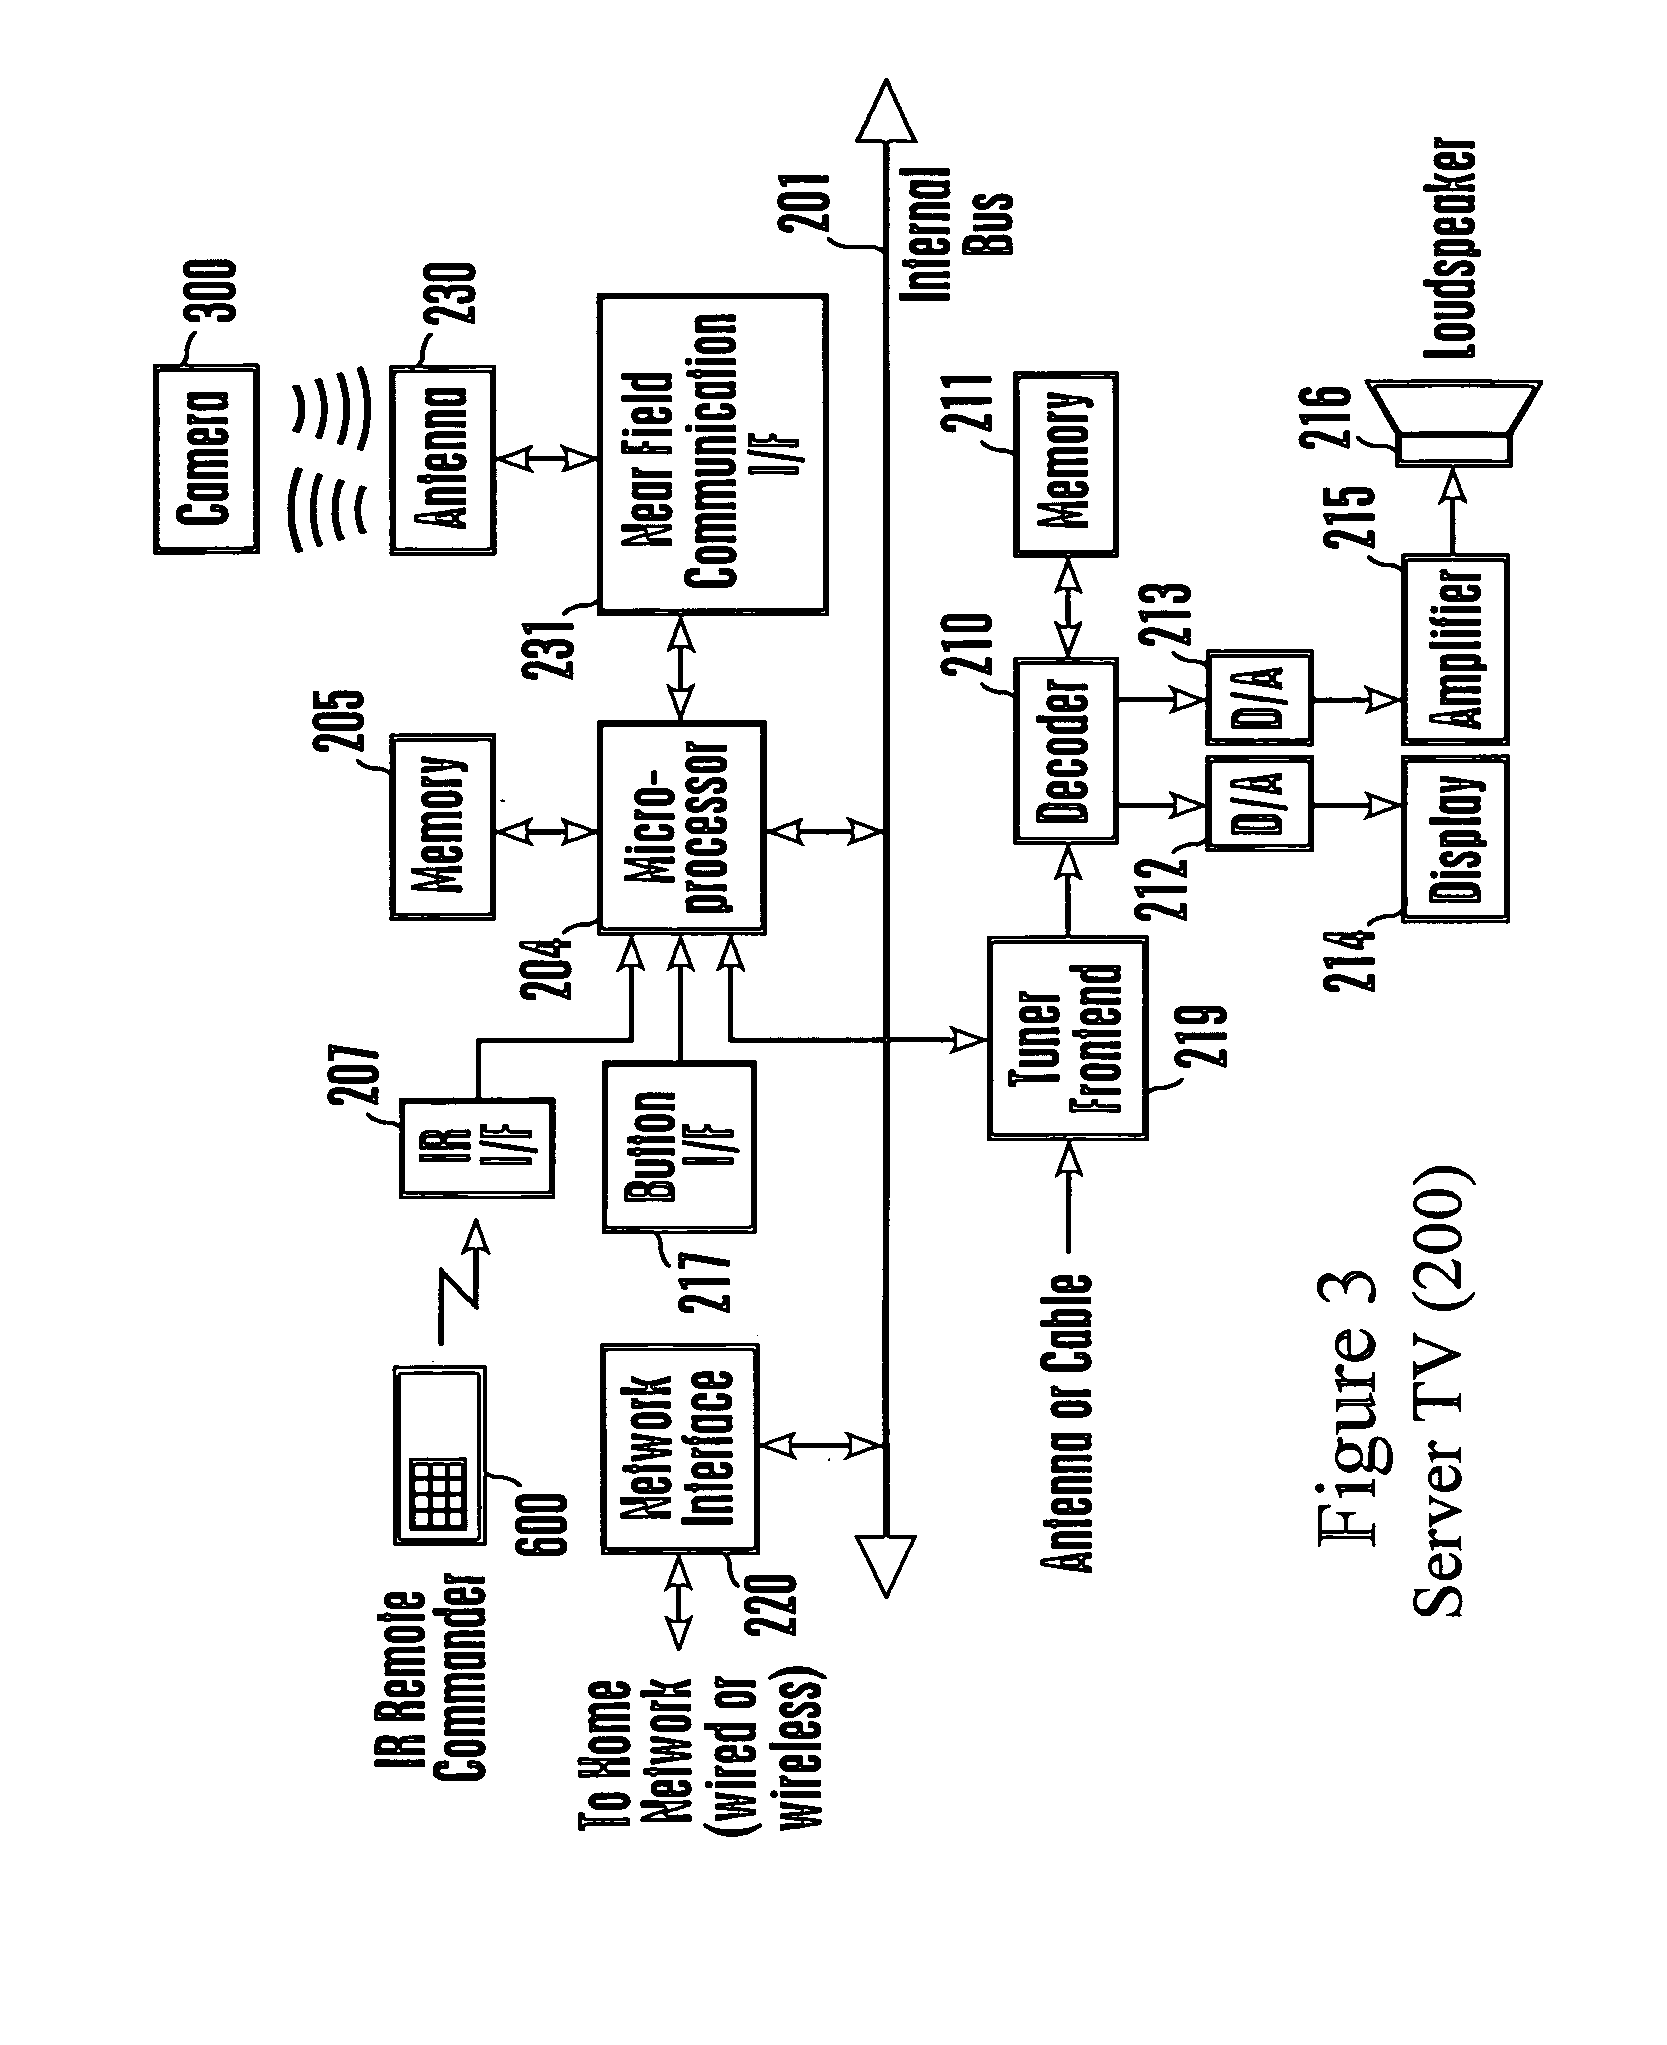 System and method for universal remote control